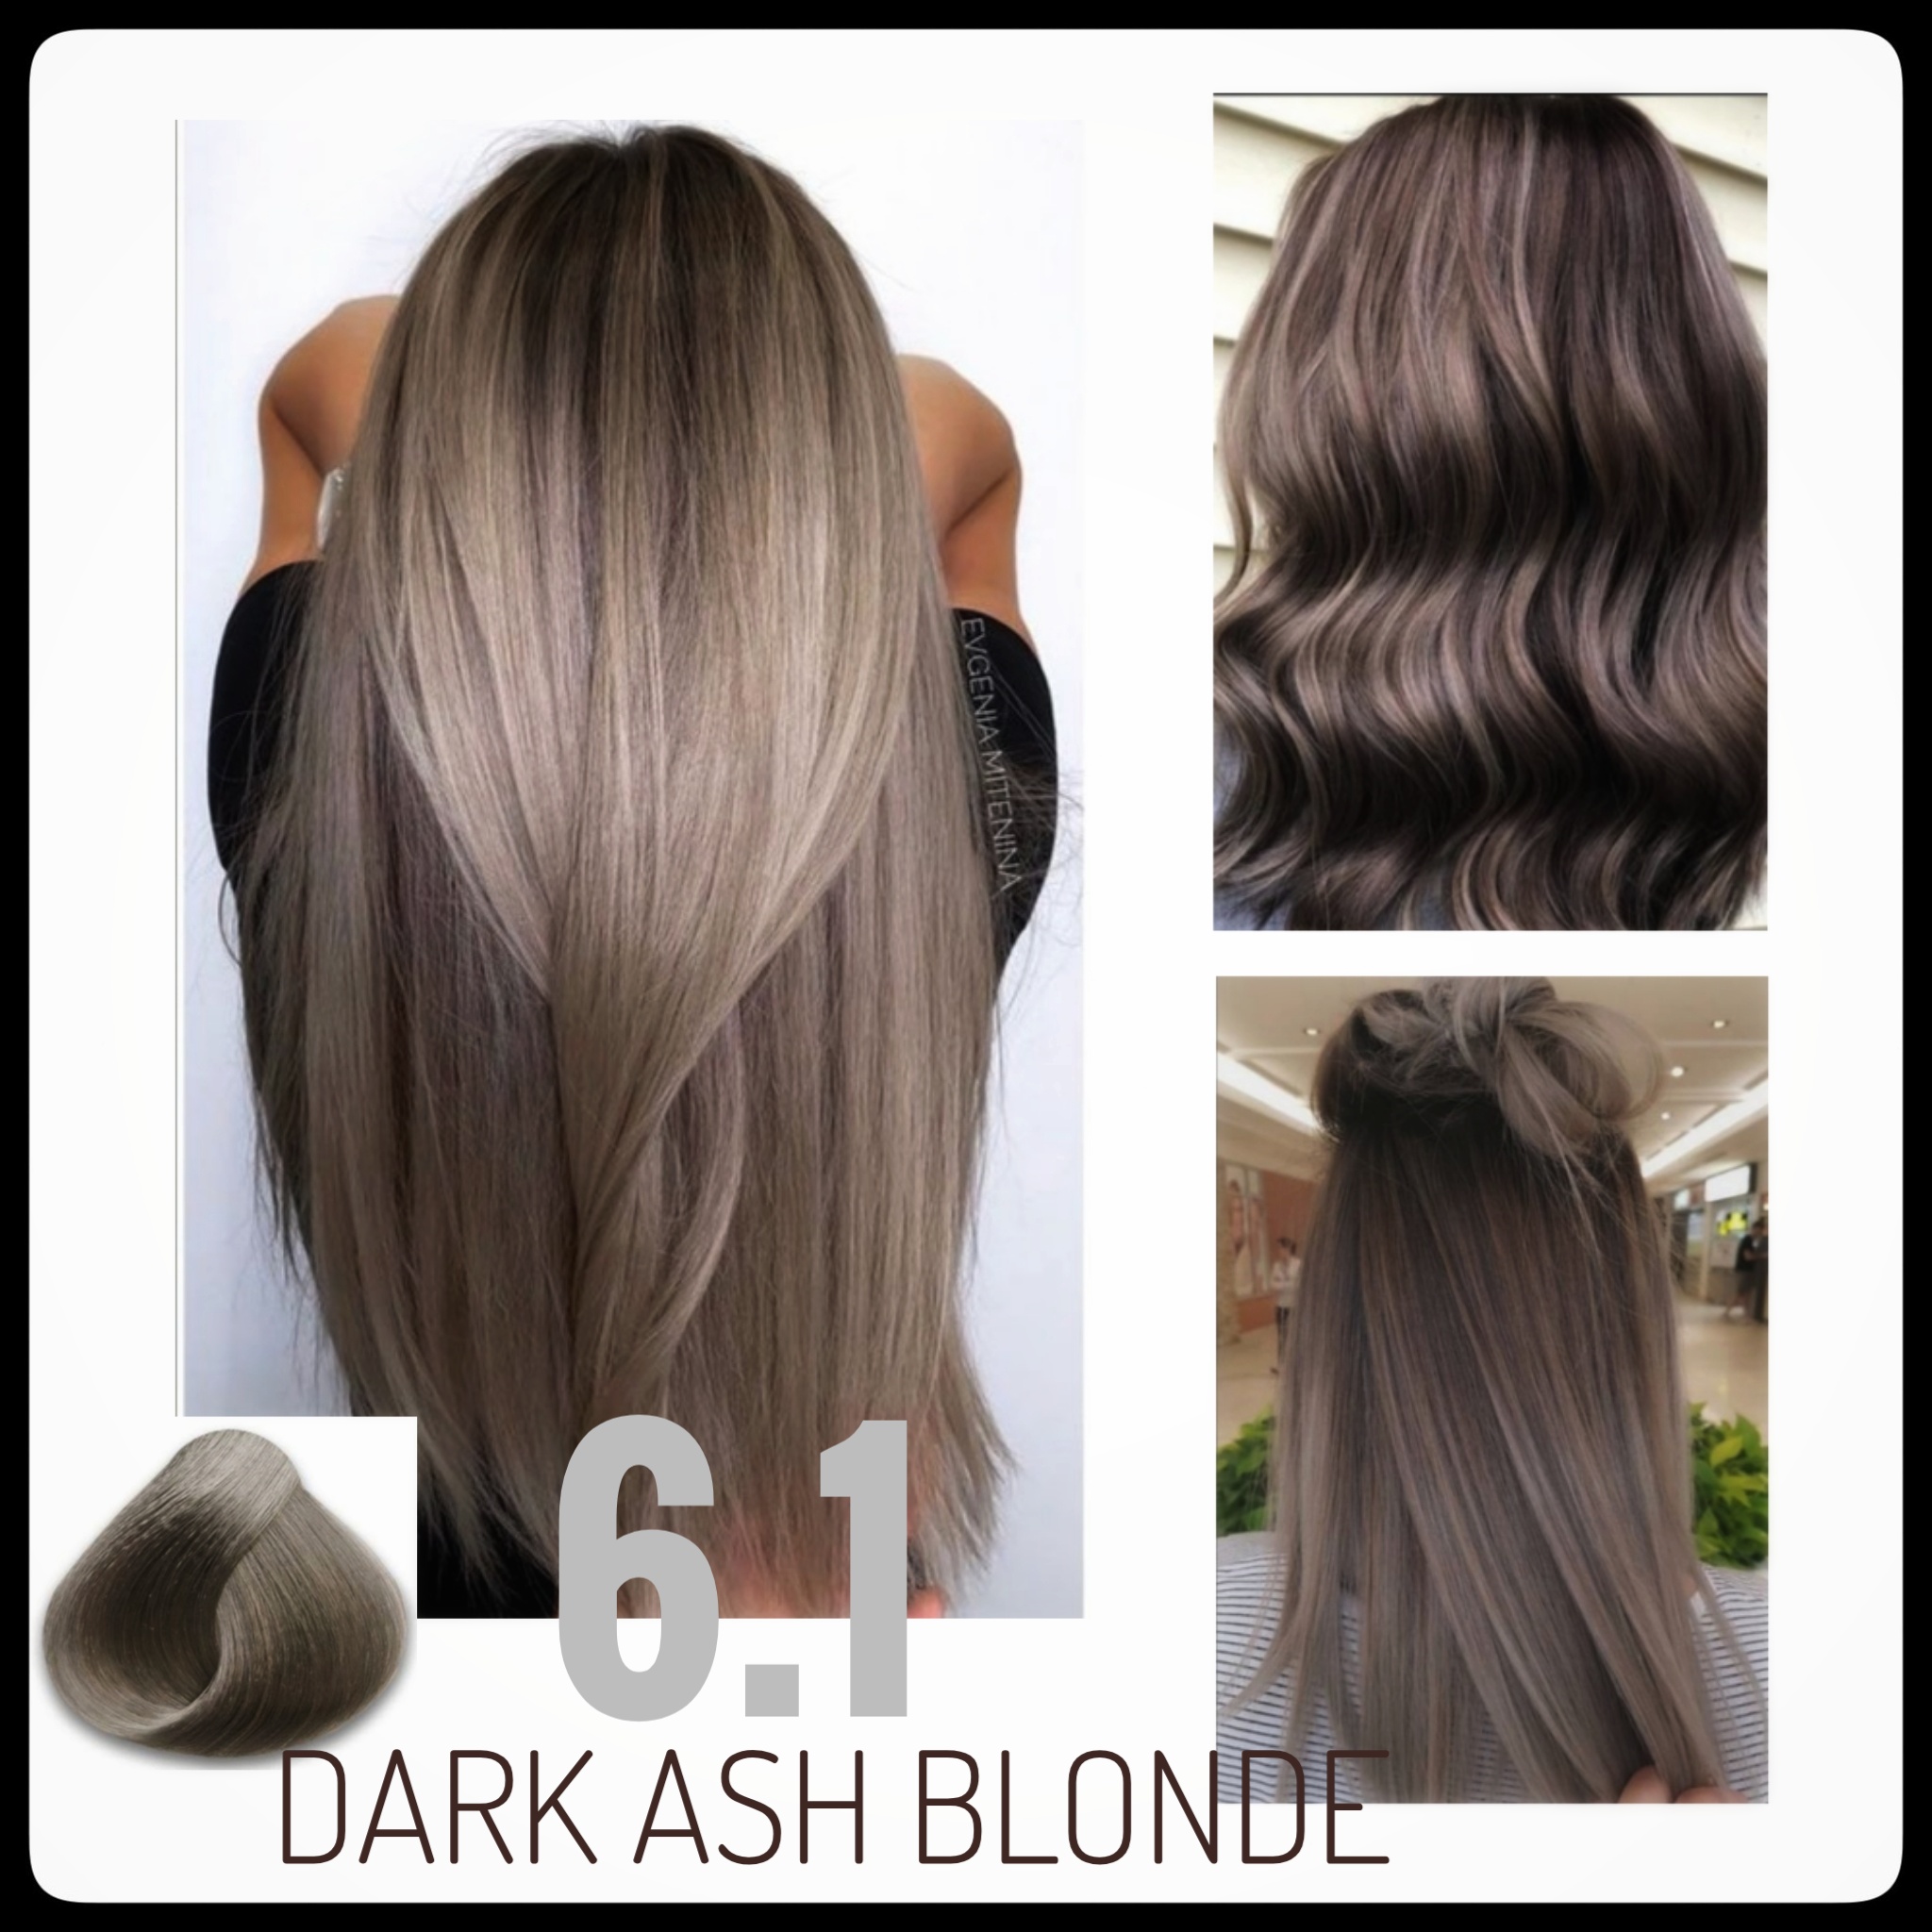 42 Types of Ash Blonde Hair Colors  Trendy Ways to Get It